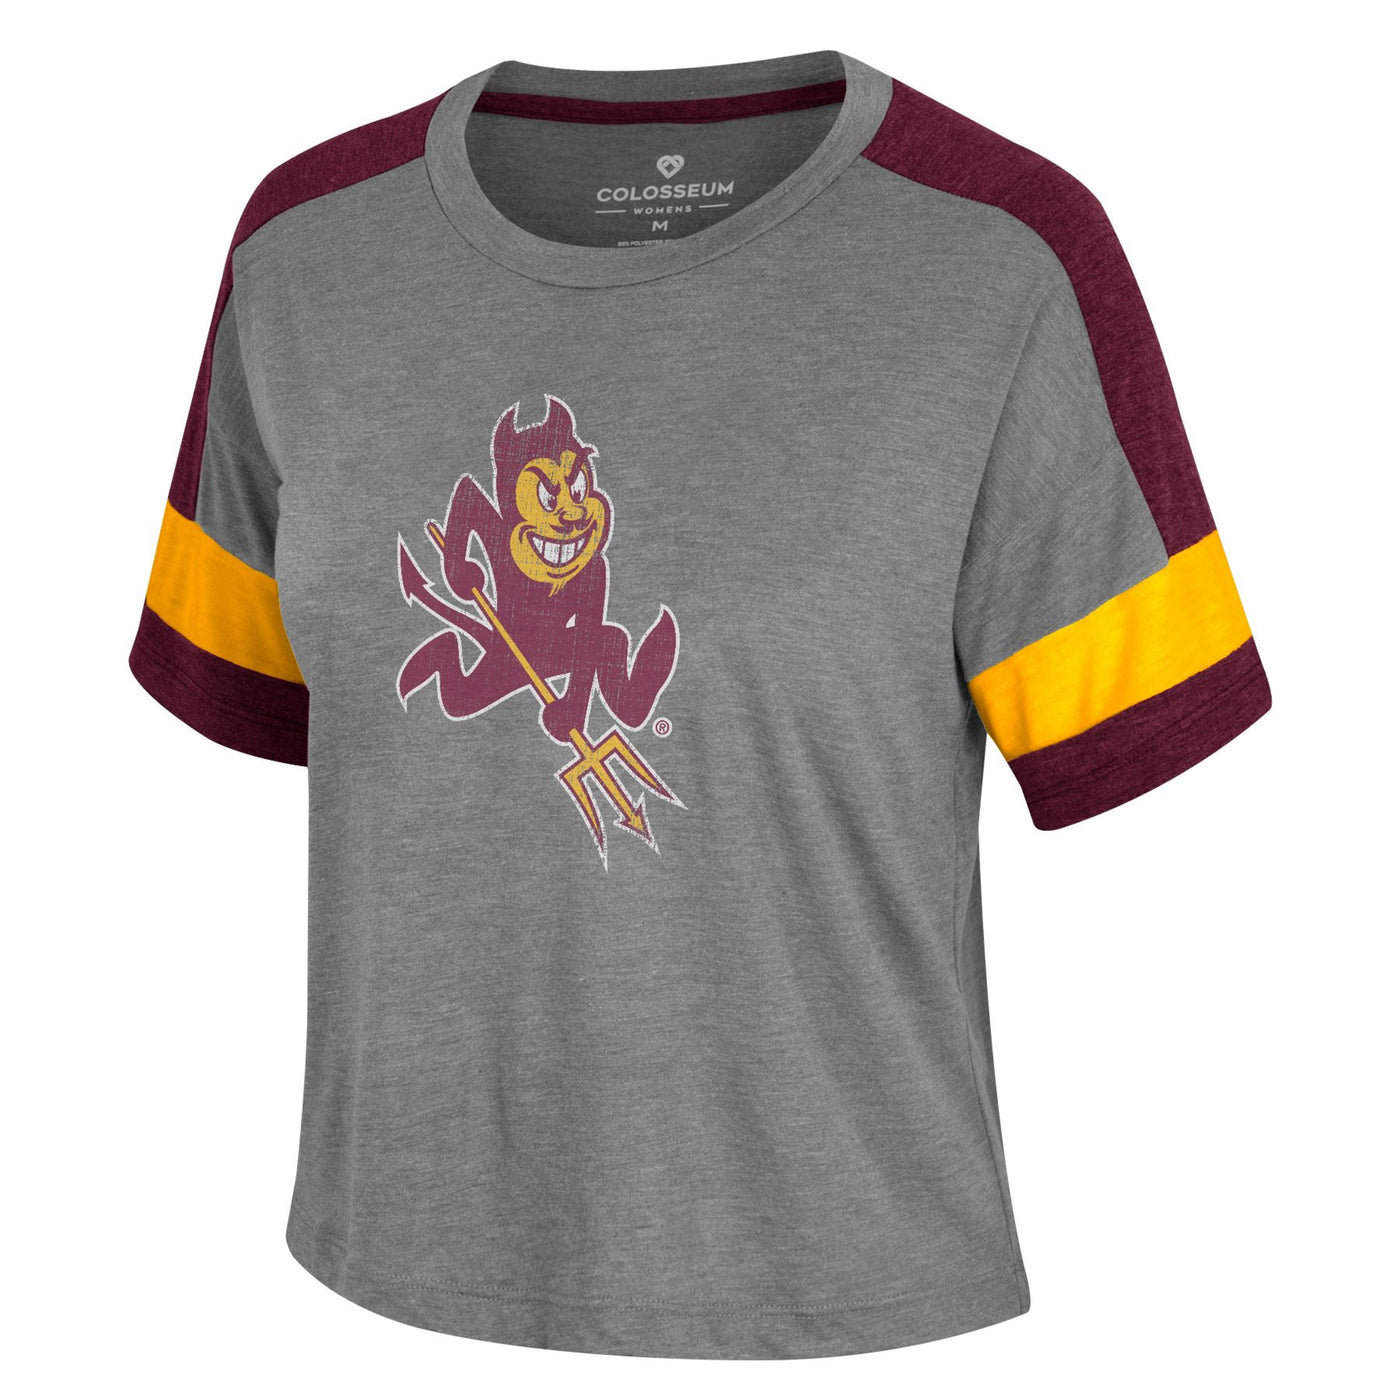 ASU gray crop top with maroon and gold stripes on the shoulder and short sleeves and a Sparky on the front